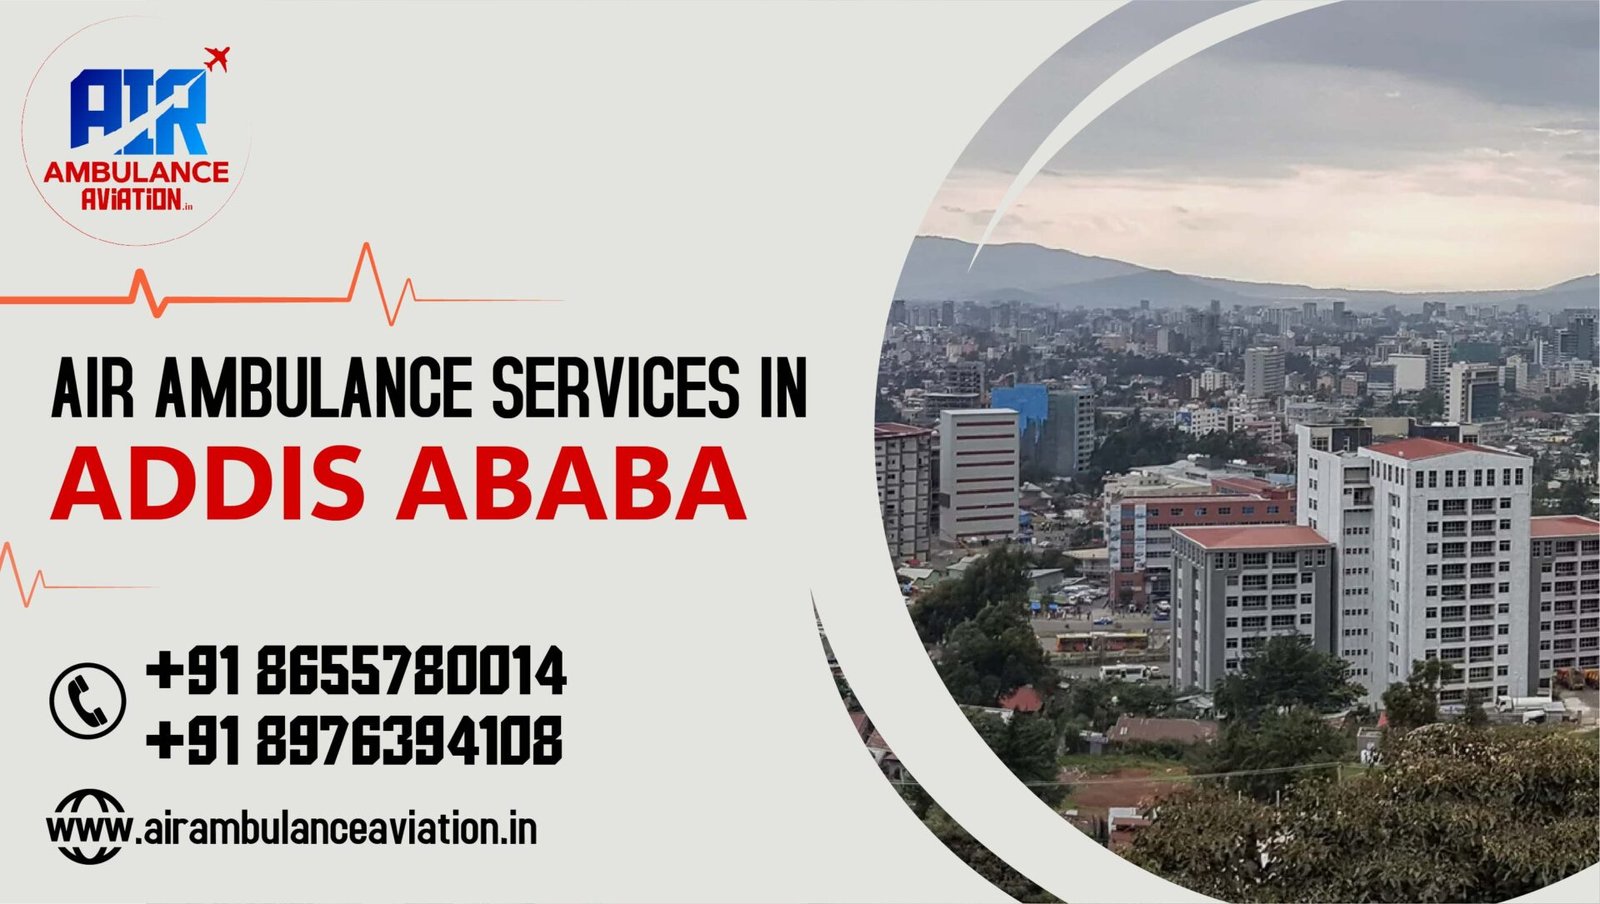 Air Ambulance Services in Addis Ababa